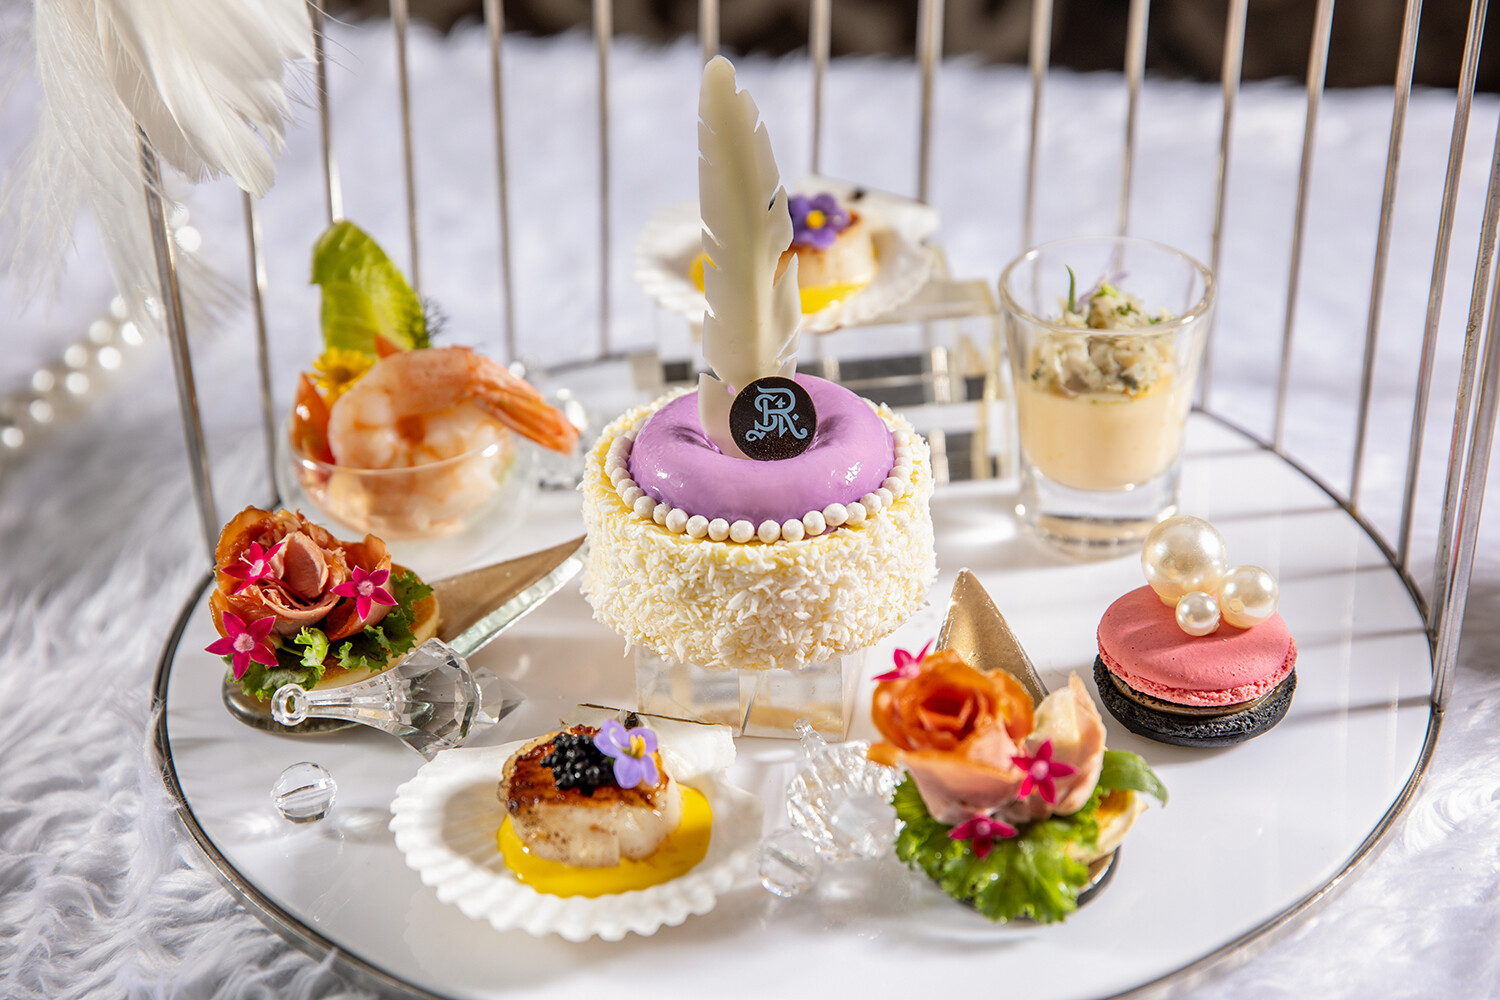 THE ST. REGIS BANKGOK CELEBRATES ITS STORIED HERITAGE WITH NEW AFTERNOON TEA INSPIRED BY THE ST. REGIS FOUNDING FAMILY